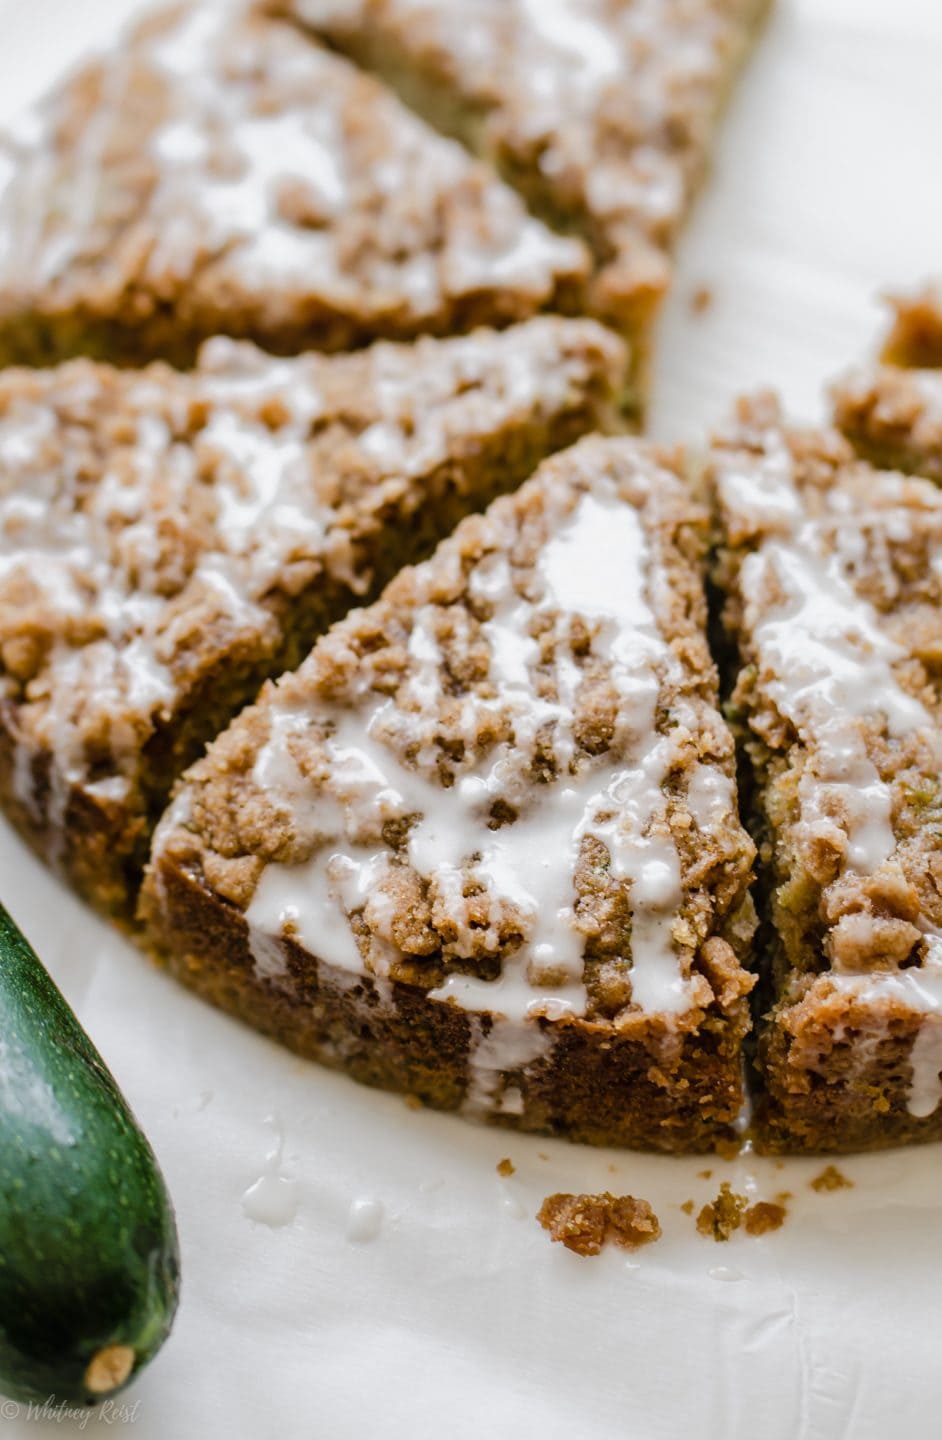 A close up shot of a sliced zucchini coffee cake to show the texture of the crumb topping.